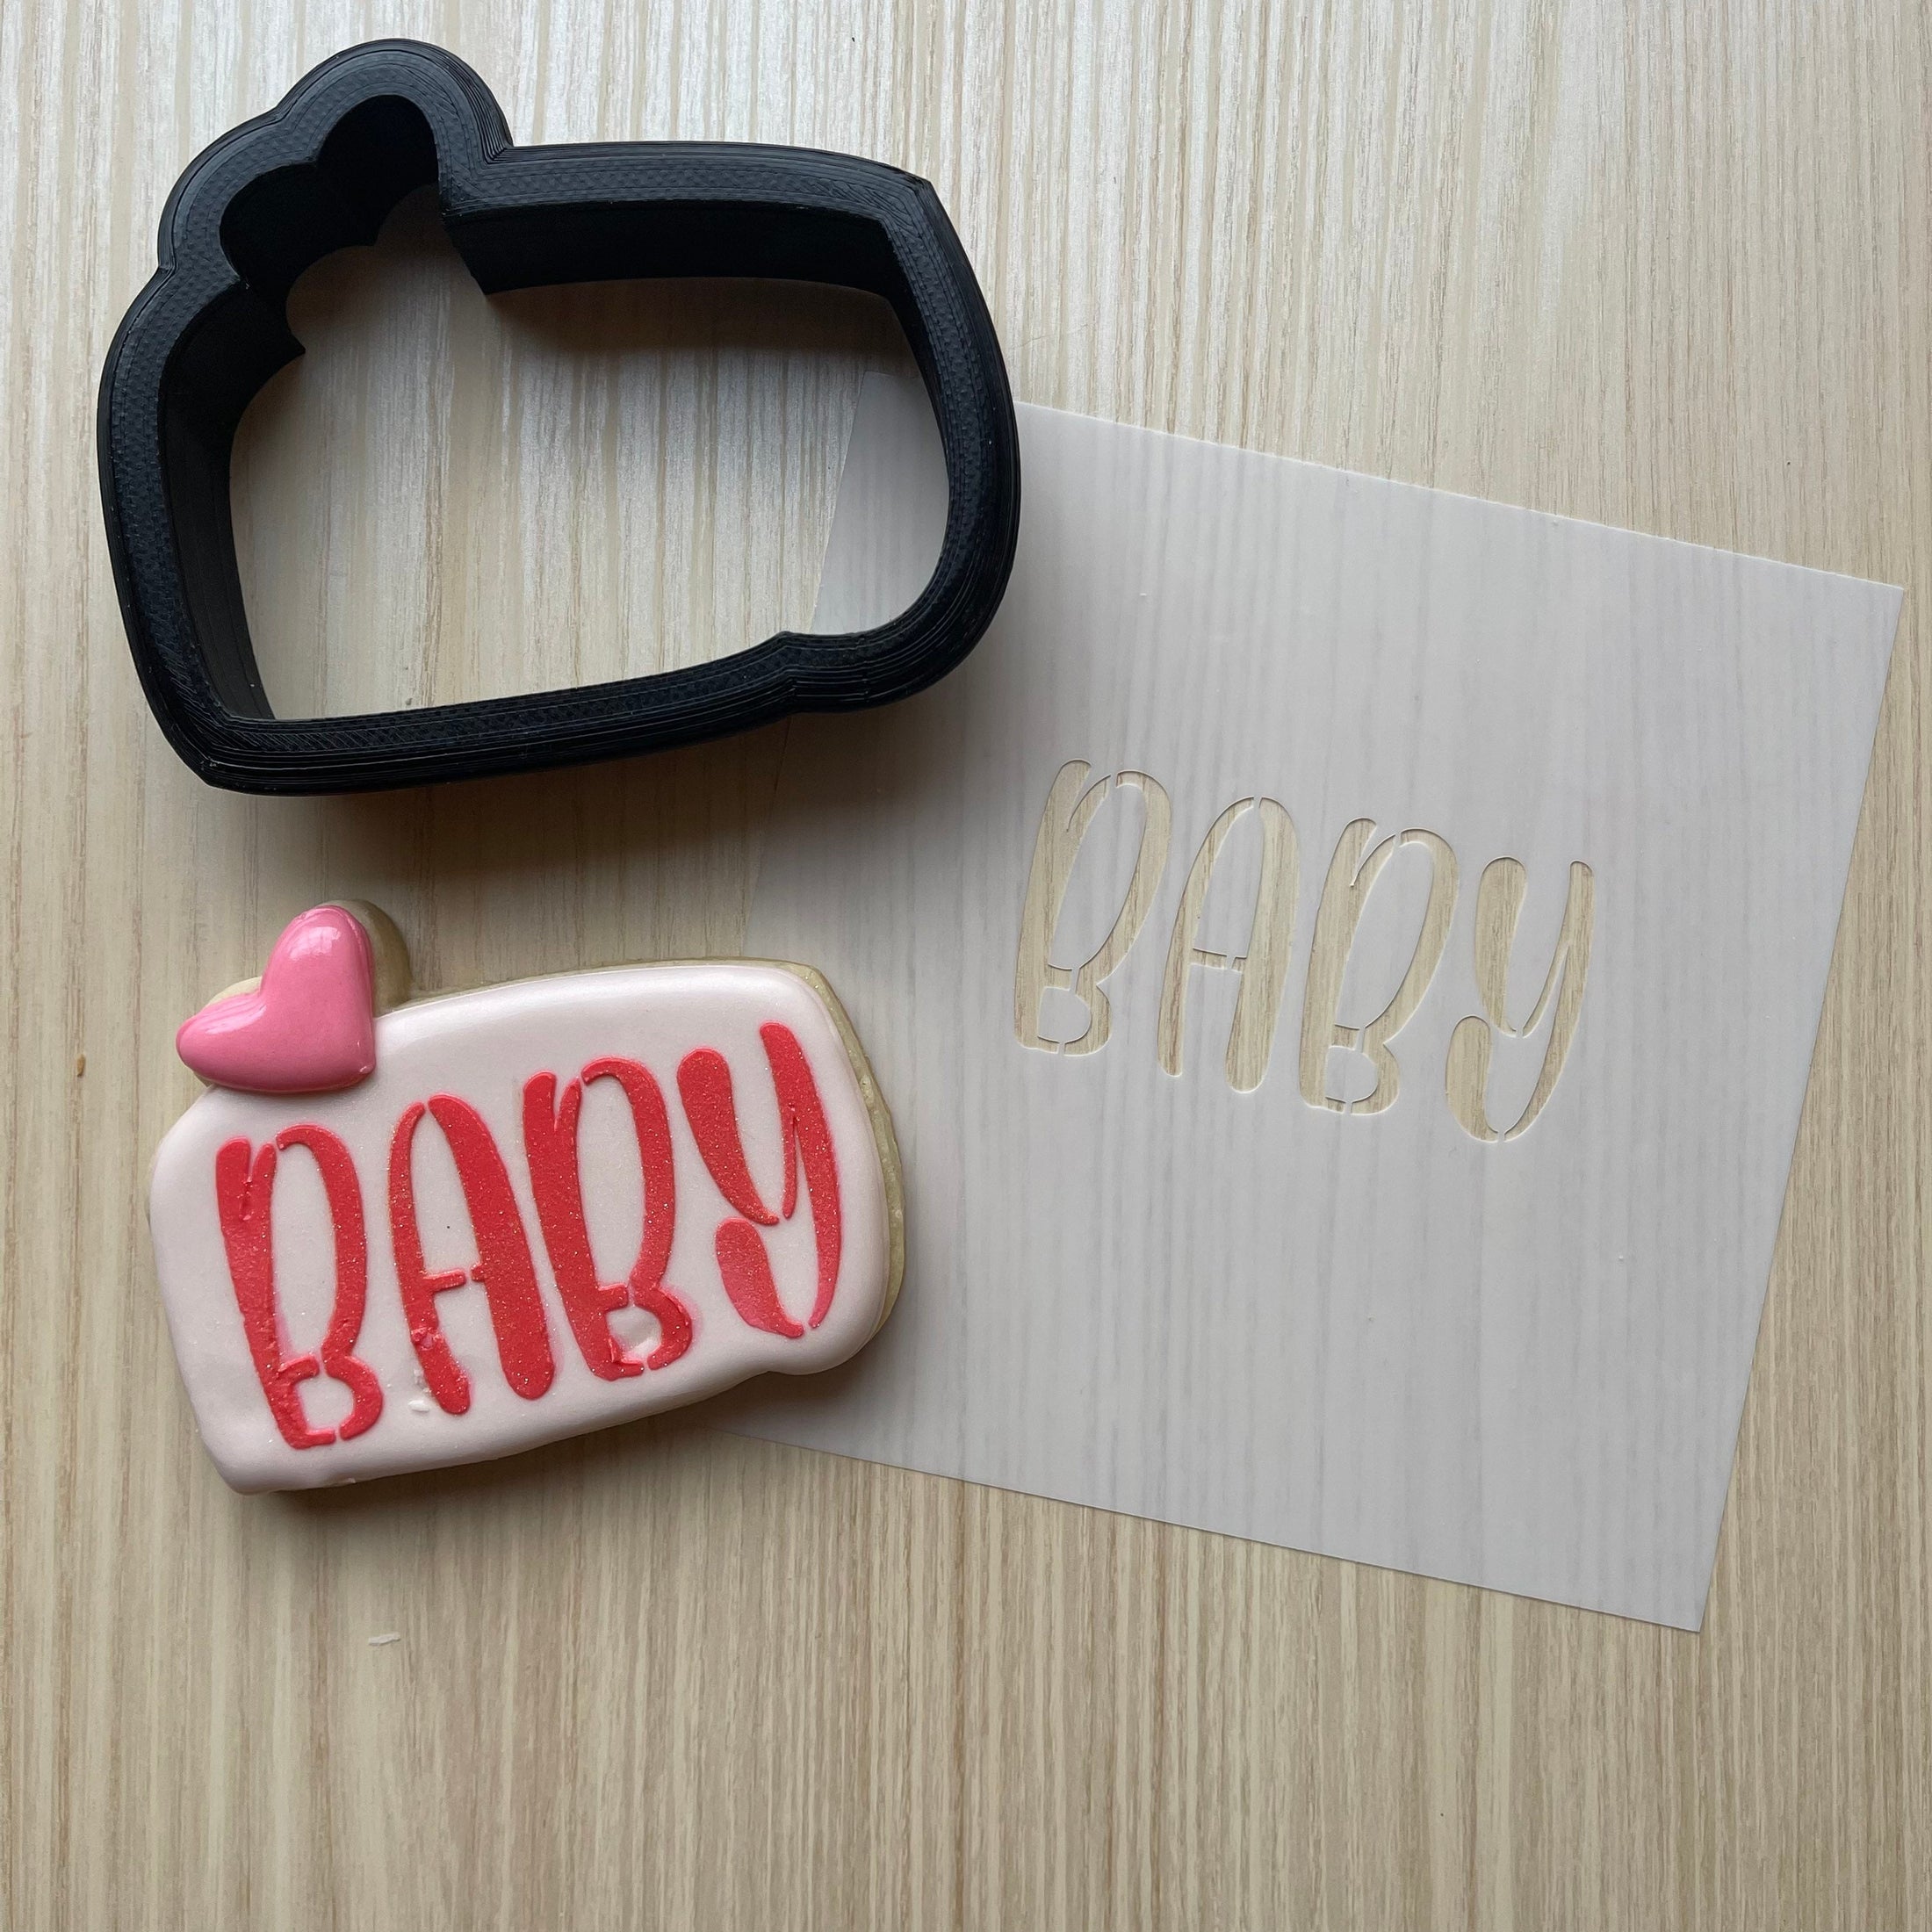 Baby plaque cookie cutter and stencil set